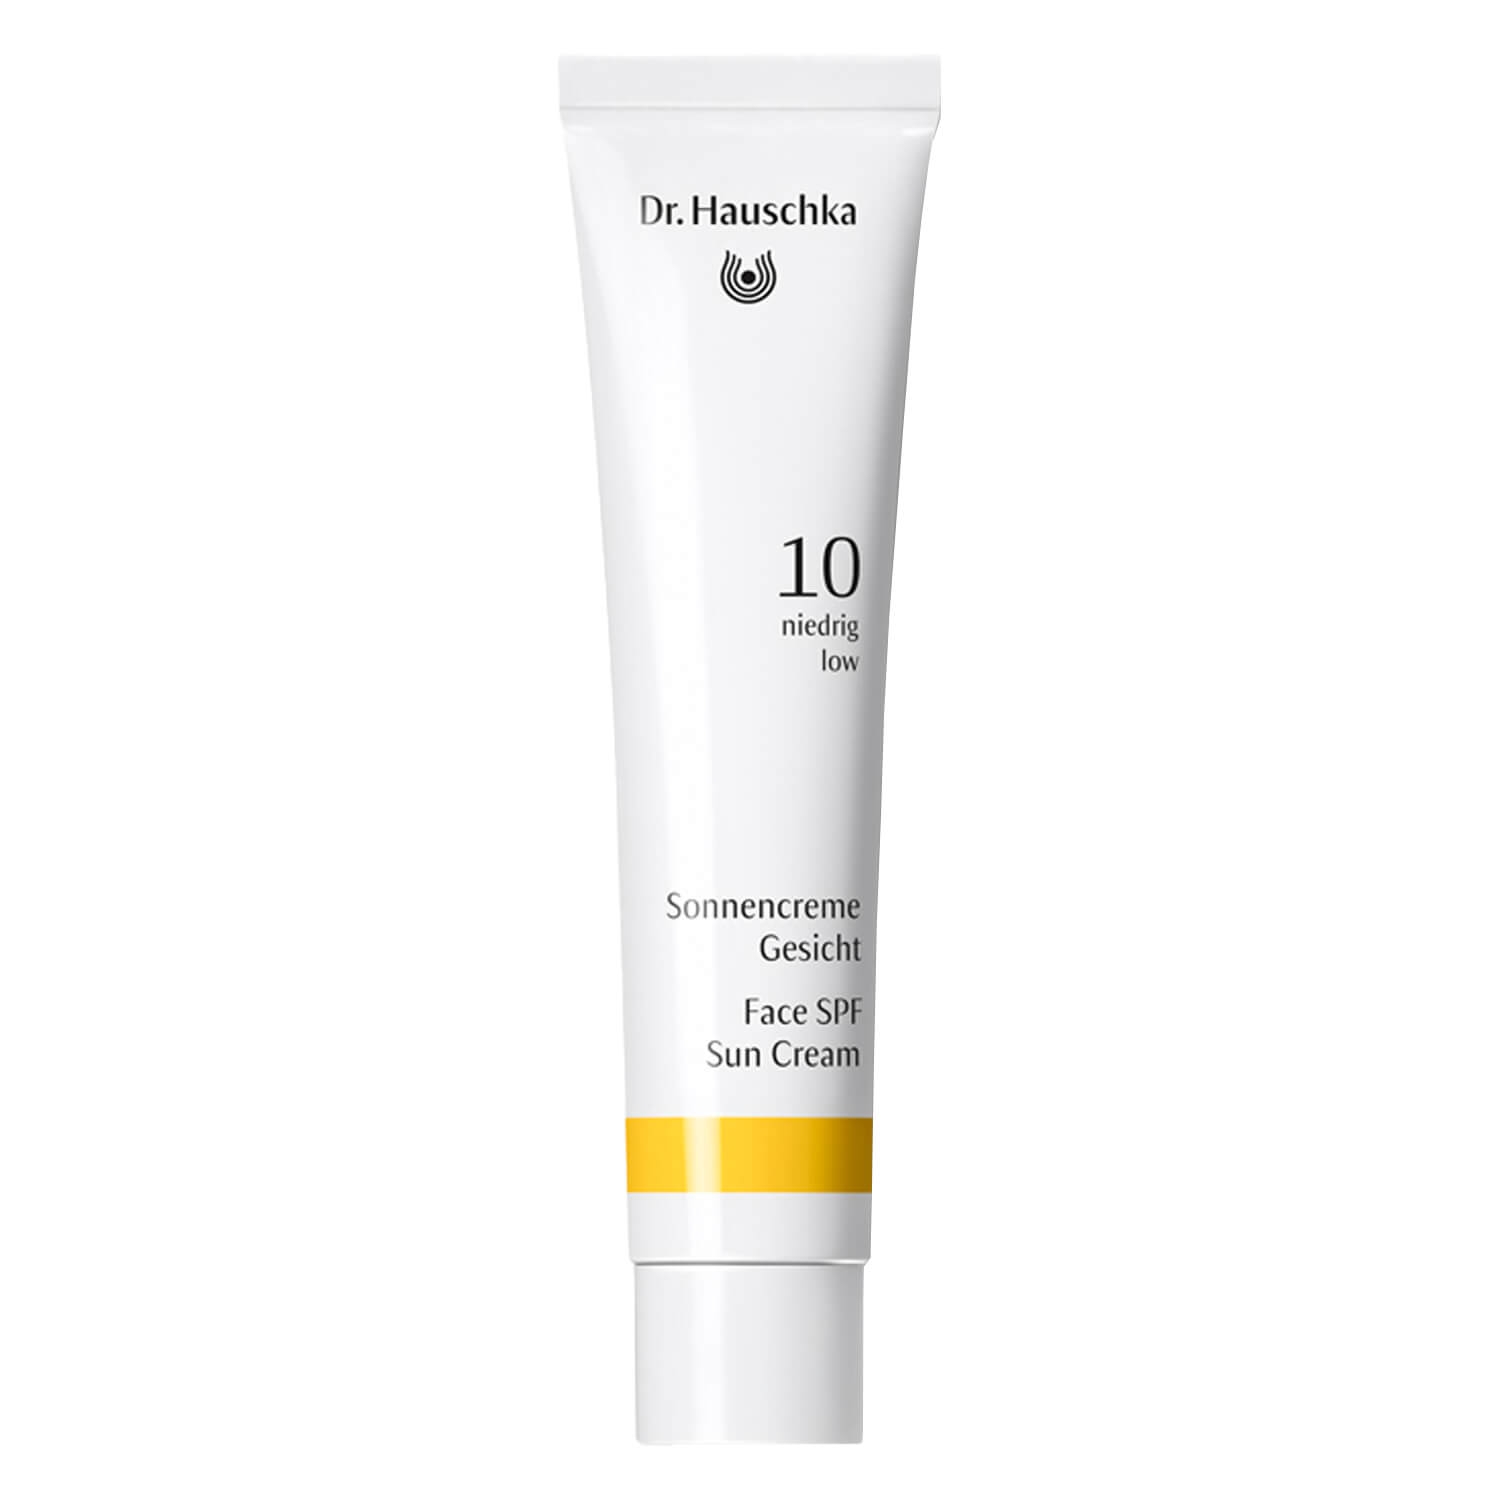 Product image from Dr. Hauschka - Sonnencreme Gesicht SPF10